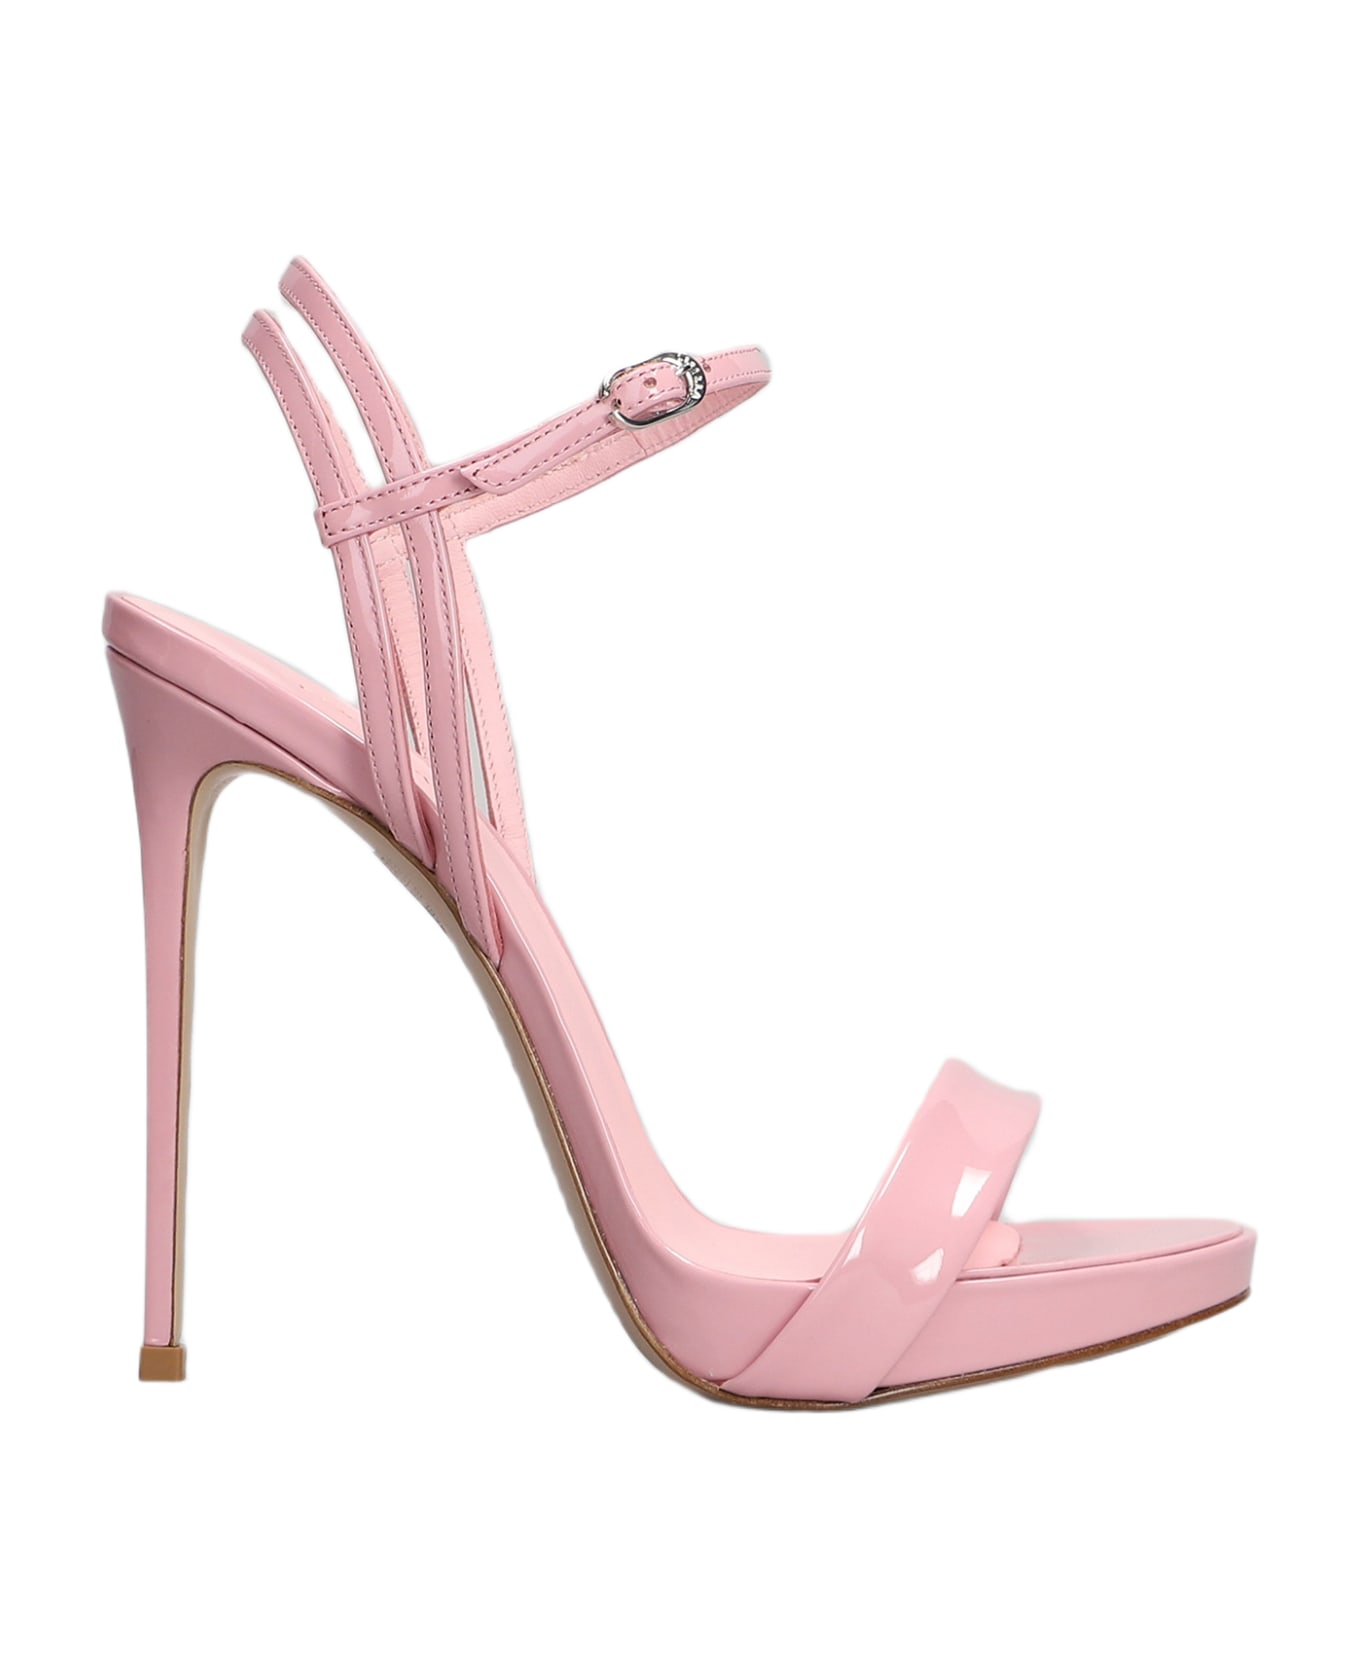 Le Silla Gwen Sandals In Rose-pink Patent Leather - rose-pink サンダル